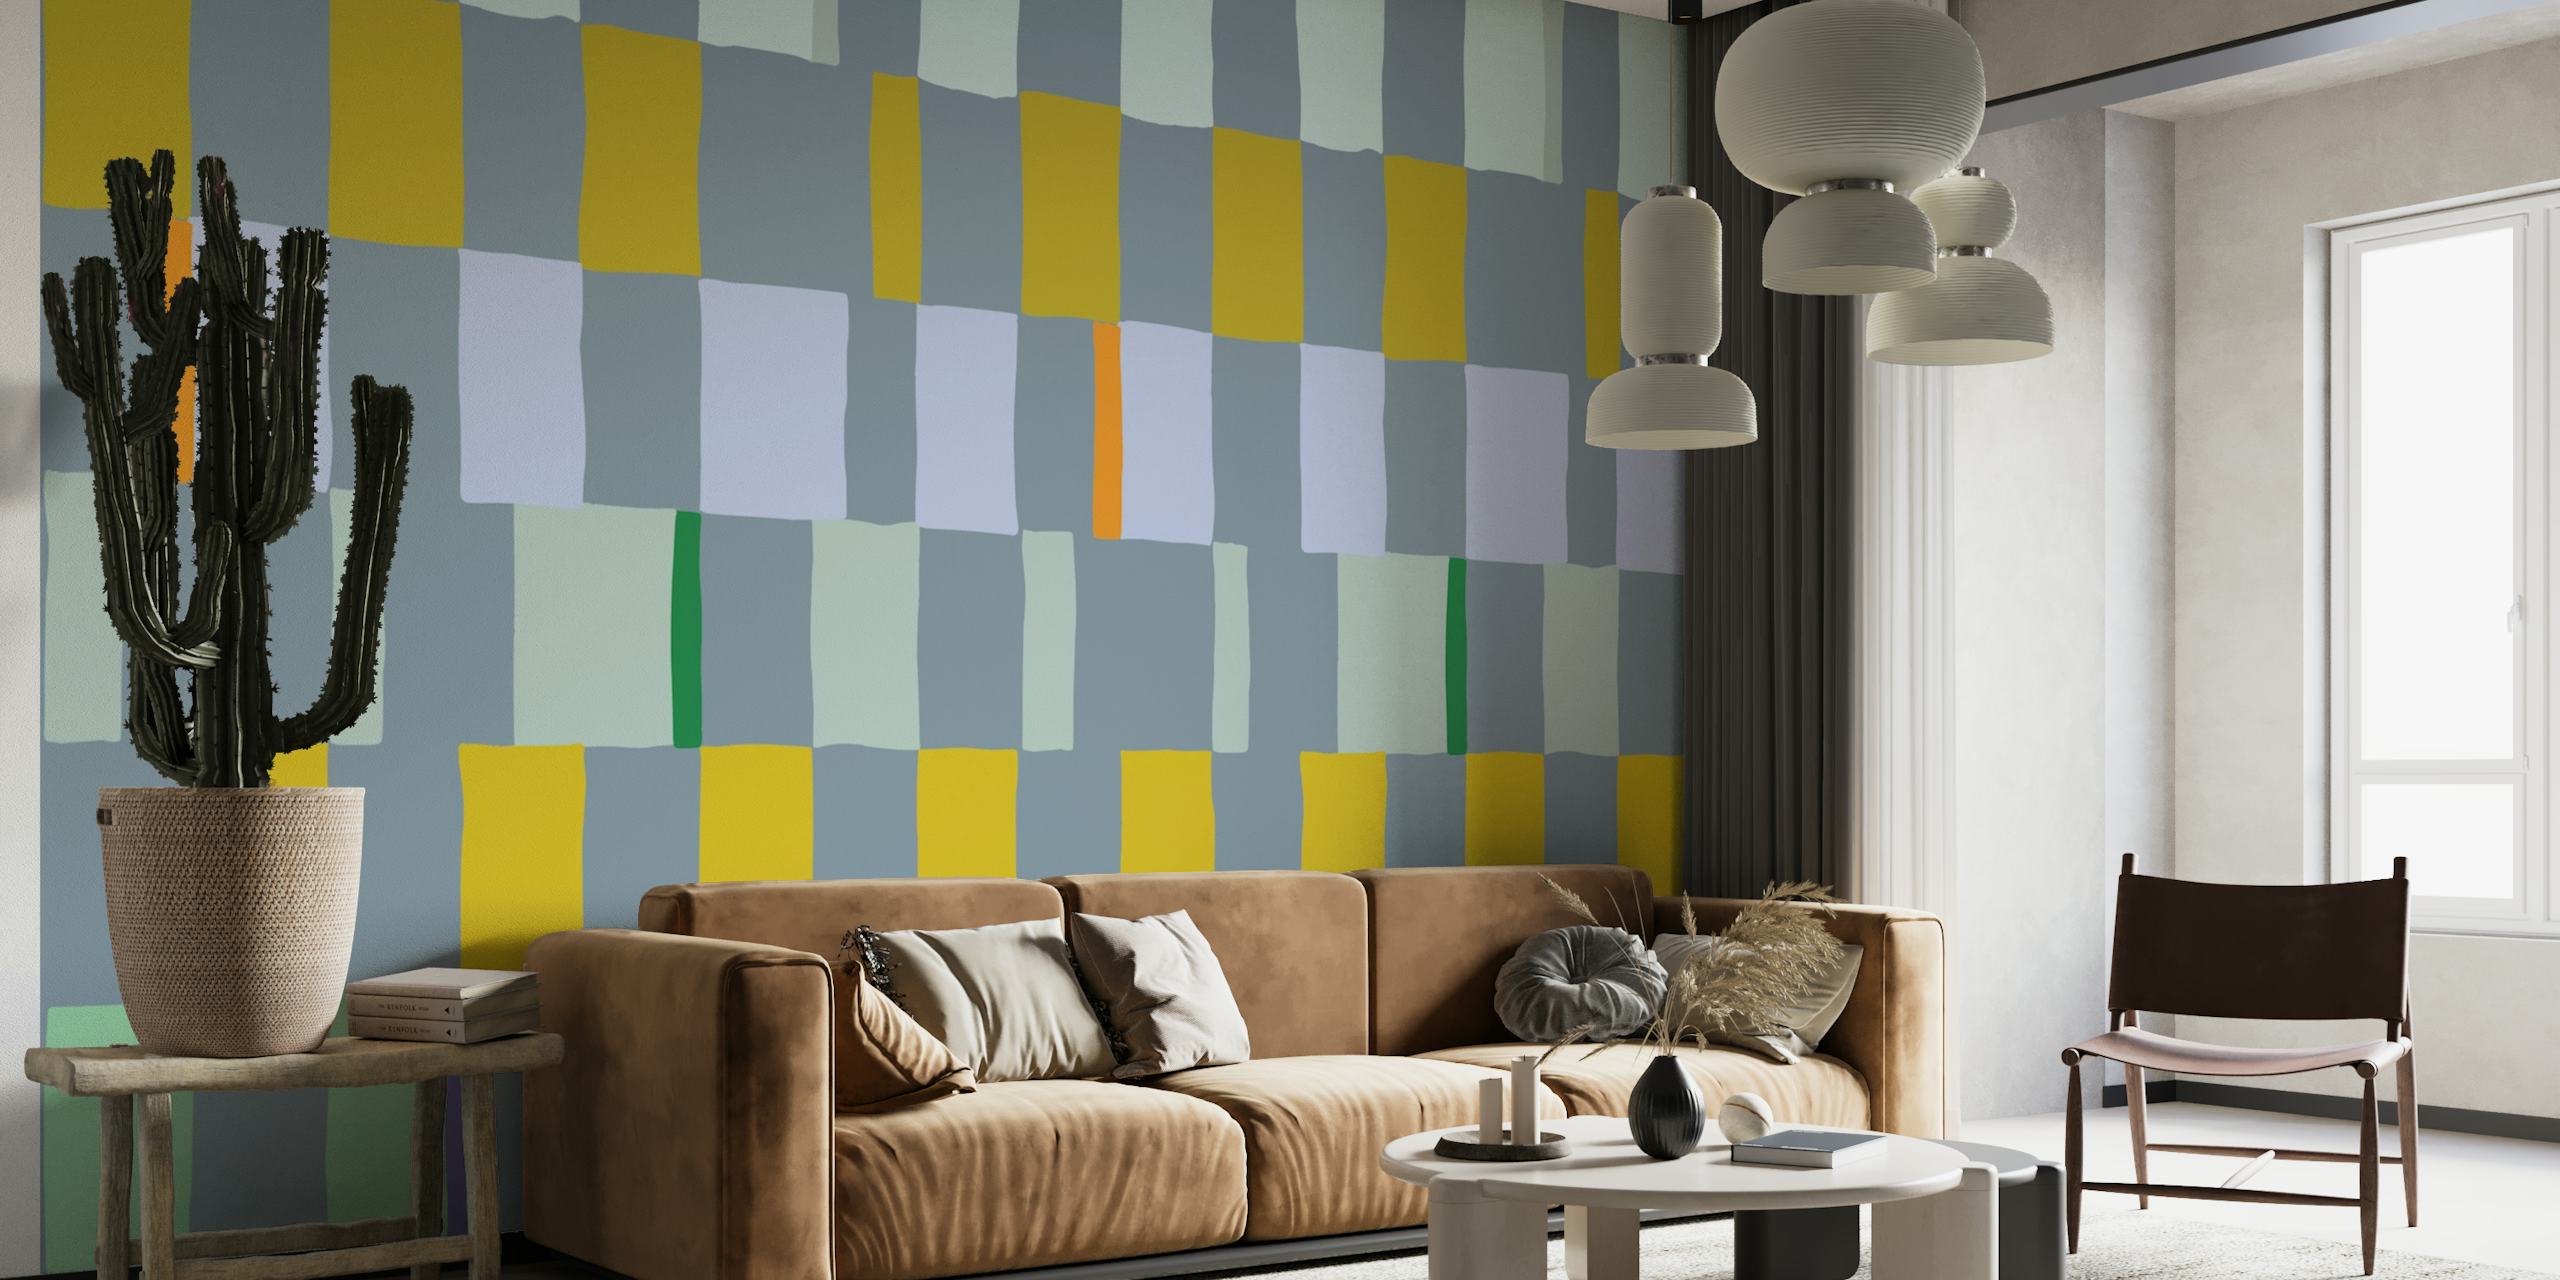 Hand-drawn checkered pattern wall mural in teal, yellow, and grey